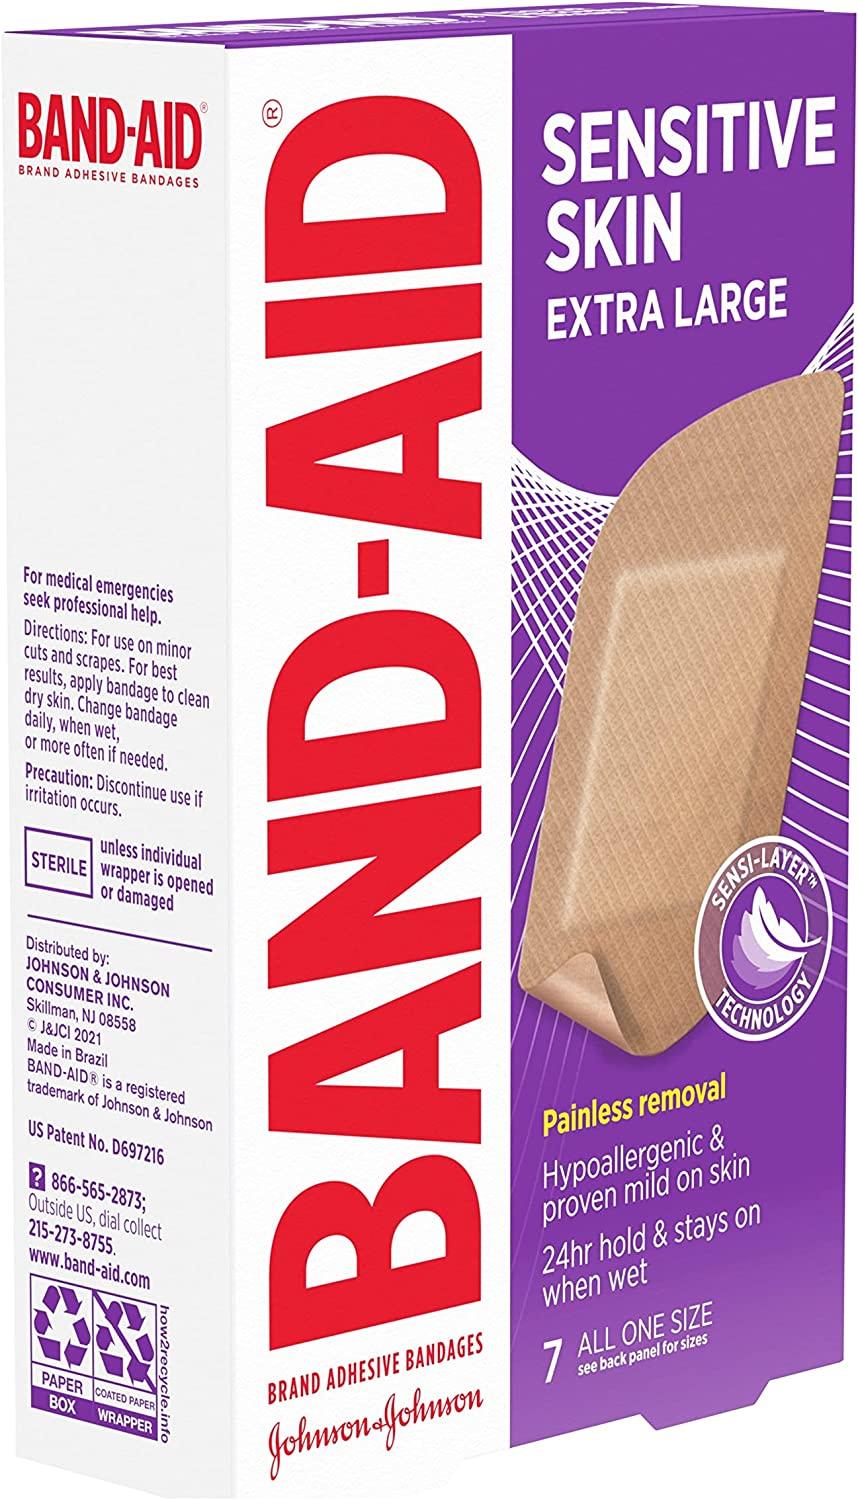 Band-Aid Brand Adhesive Bandages for Sensitive Skin, Hypoallergenic  Bandages with Painless Removal, Stays on When Wet and Suitable for Eczema  Prone Skin, Sterile, Extra Large Size, 7 ct